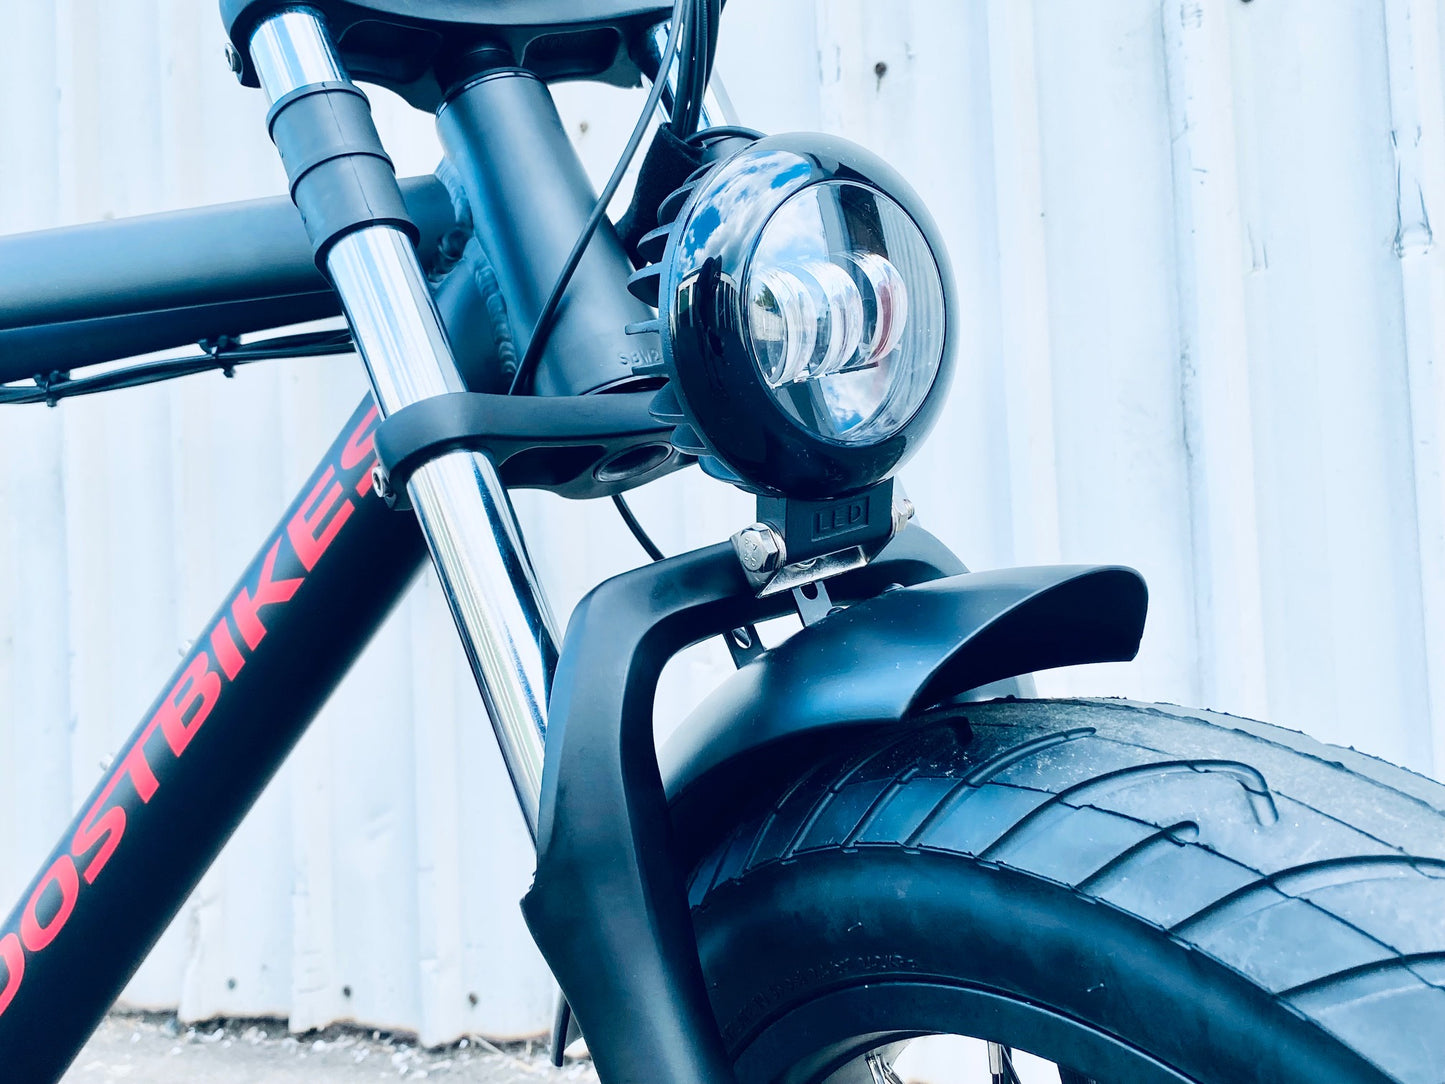 Electric Moped style in a 20" SUPER 73 fat tyre package. Apache from Boostbikes.